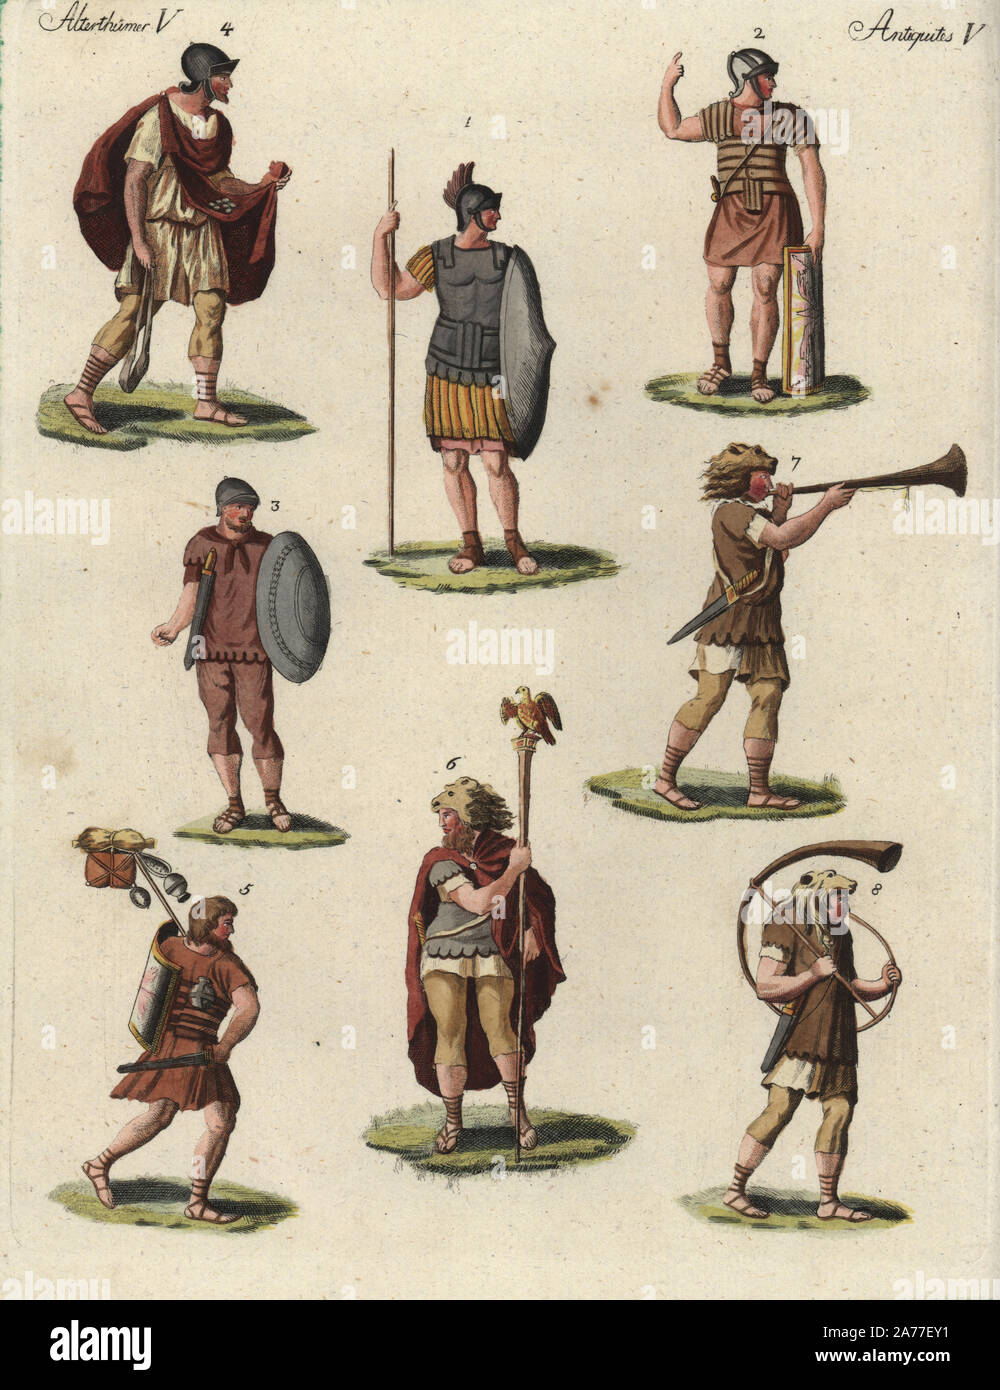 Heavily armed Roman legionnaires 1,2, lightly armed soldiers 3,4, Roman soldier with pack on a march 5, eagle bearer 6 and trumpet and horn players 7,8. Handcoloured copperplate engraving from Friedrich Johann Bertuch's Bilderbuch fur Kinder (Picture Book for Children), Weimar, 1795. Stock Photo